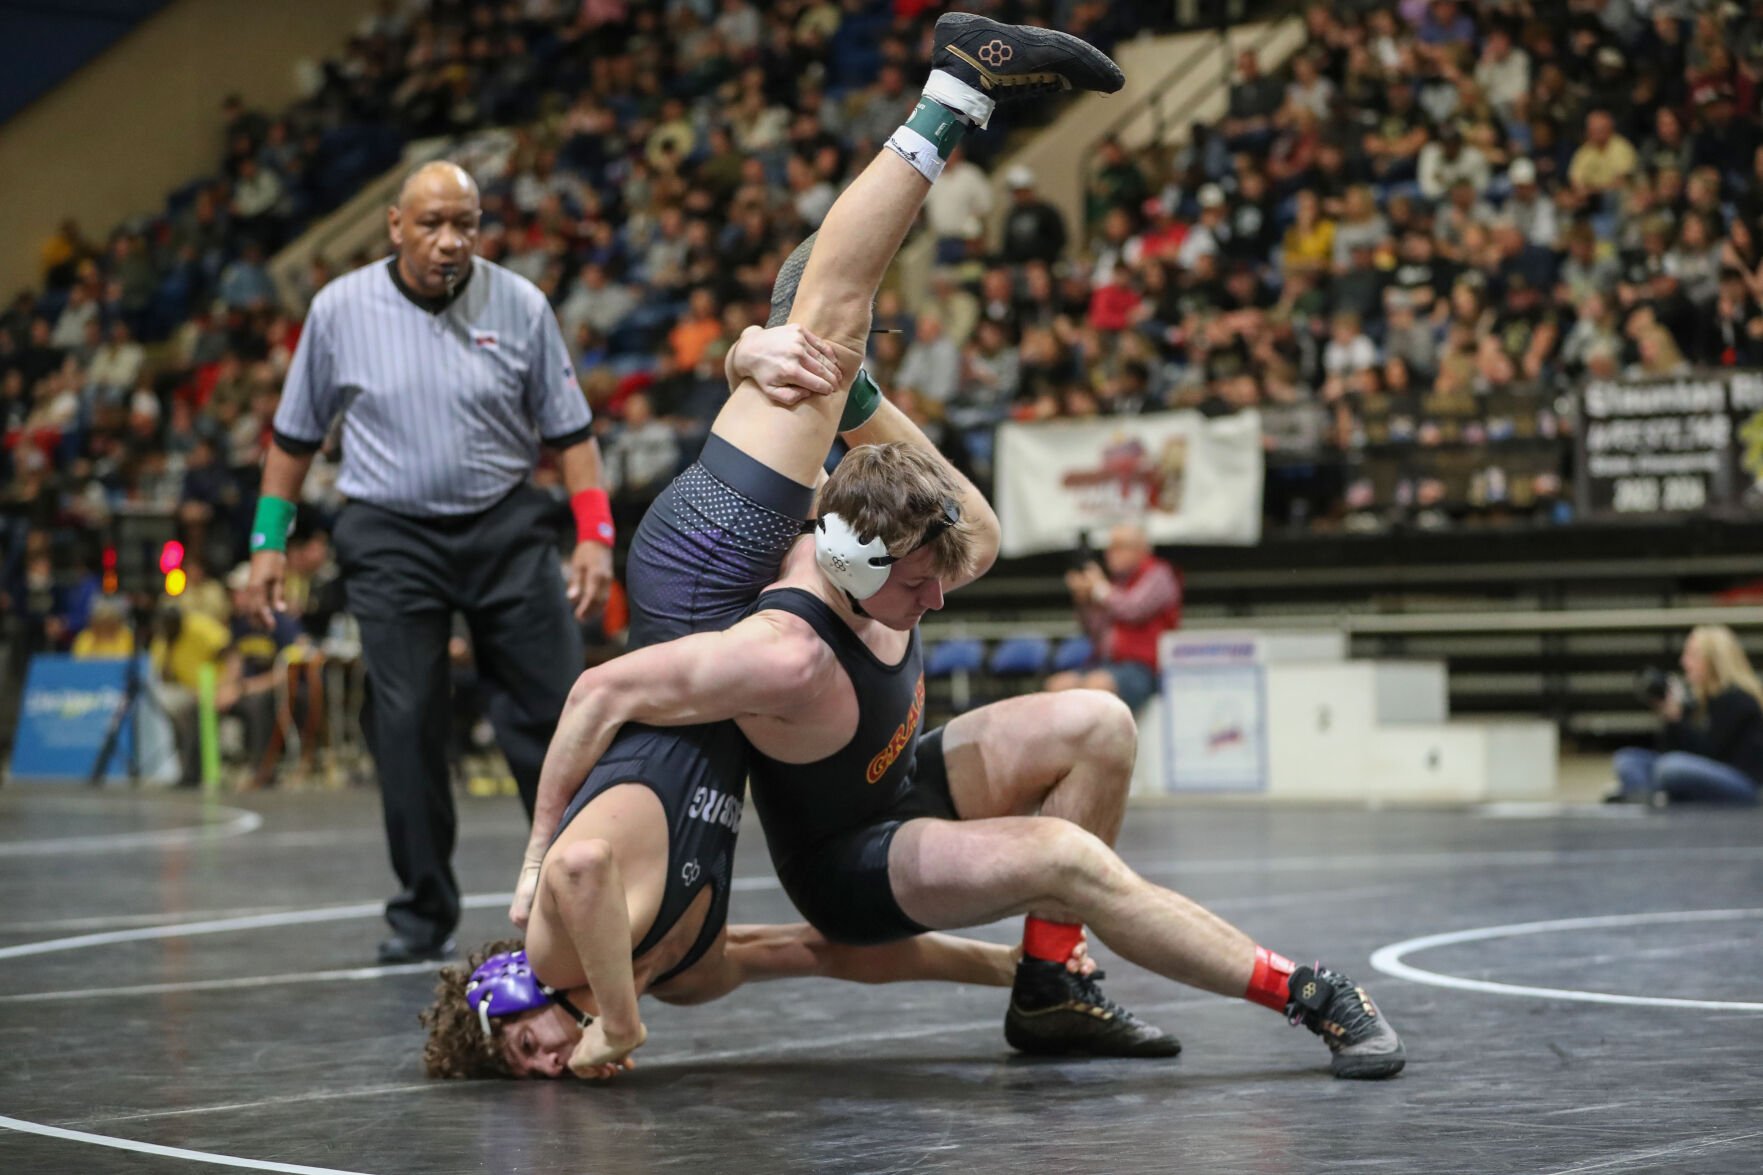 HIGH SCHOOL WRESTLING: Quest continues for Graham senior: Three-time state runner-up Hass to wrestle next at VMI